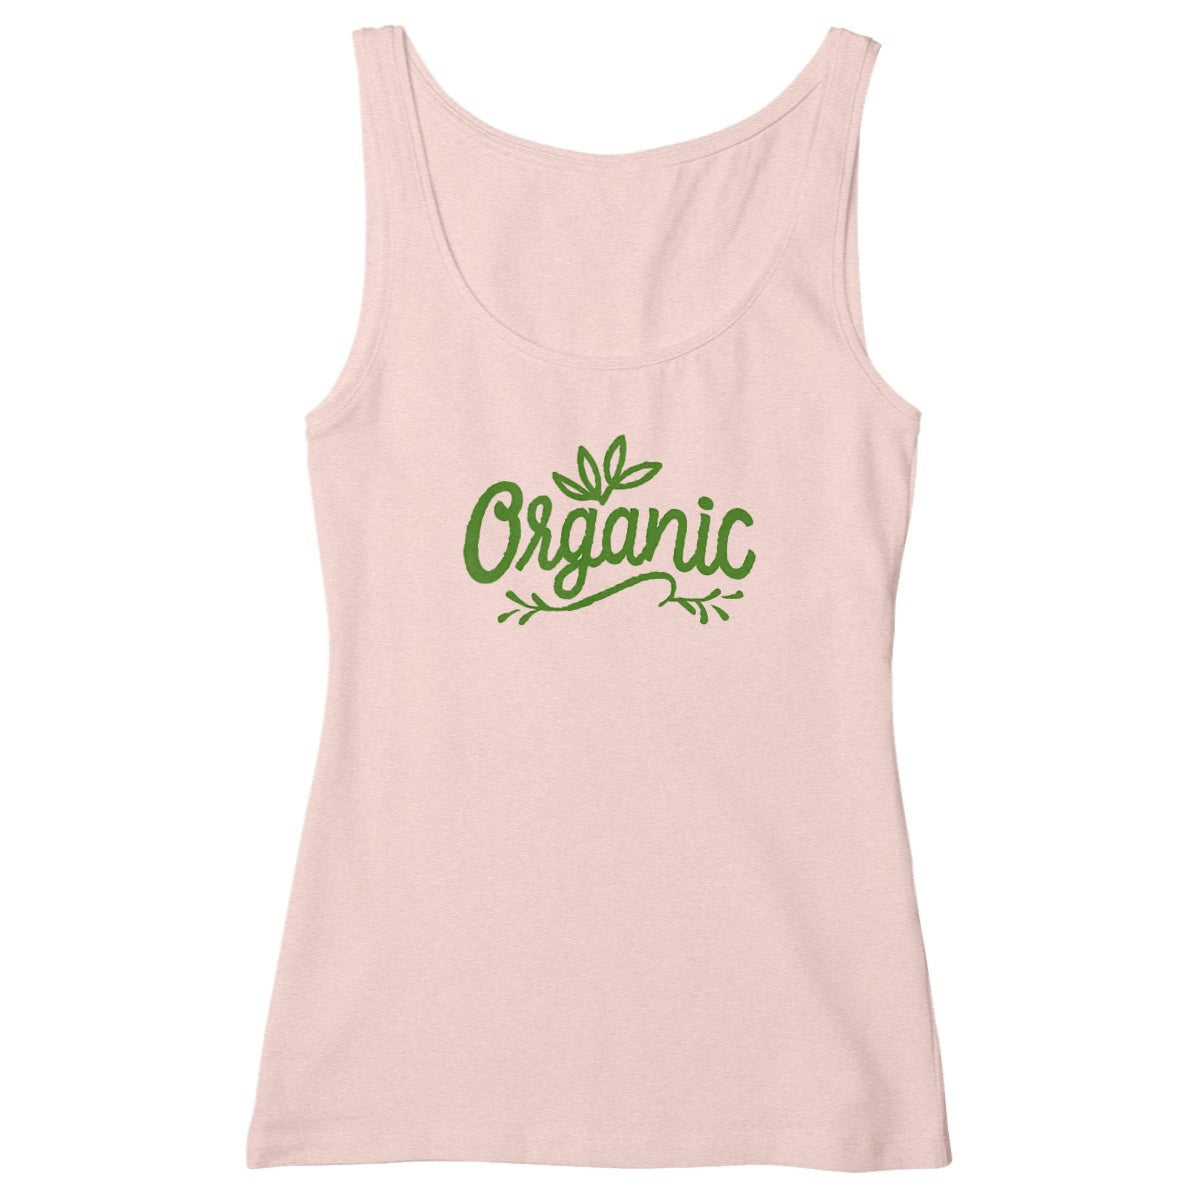 Natural Elements Organic Cotton Graphic Tank | Hypoallergenic - Allergy Friendly - Naturally Free